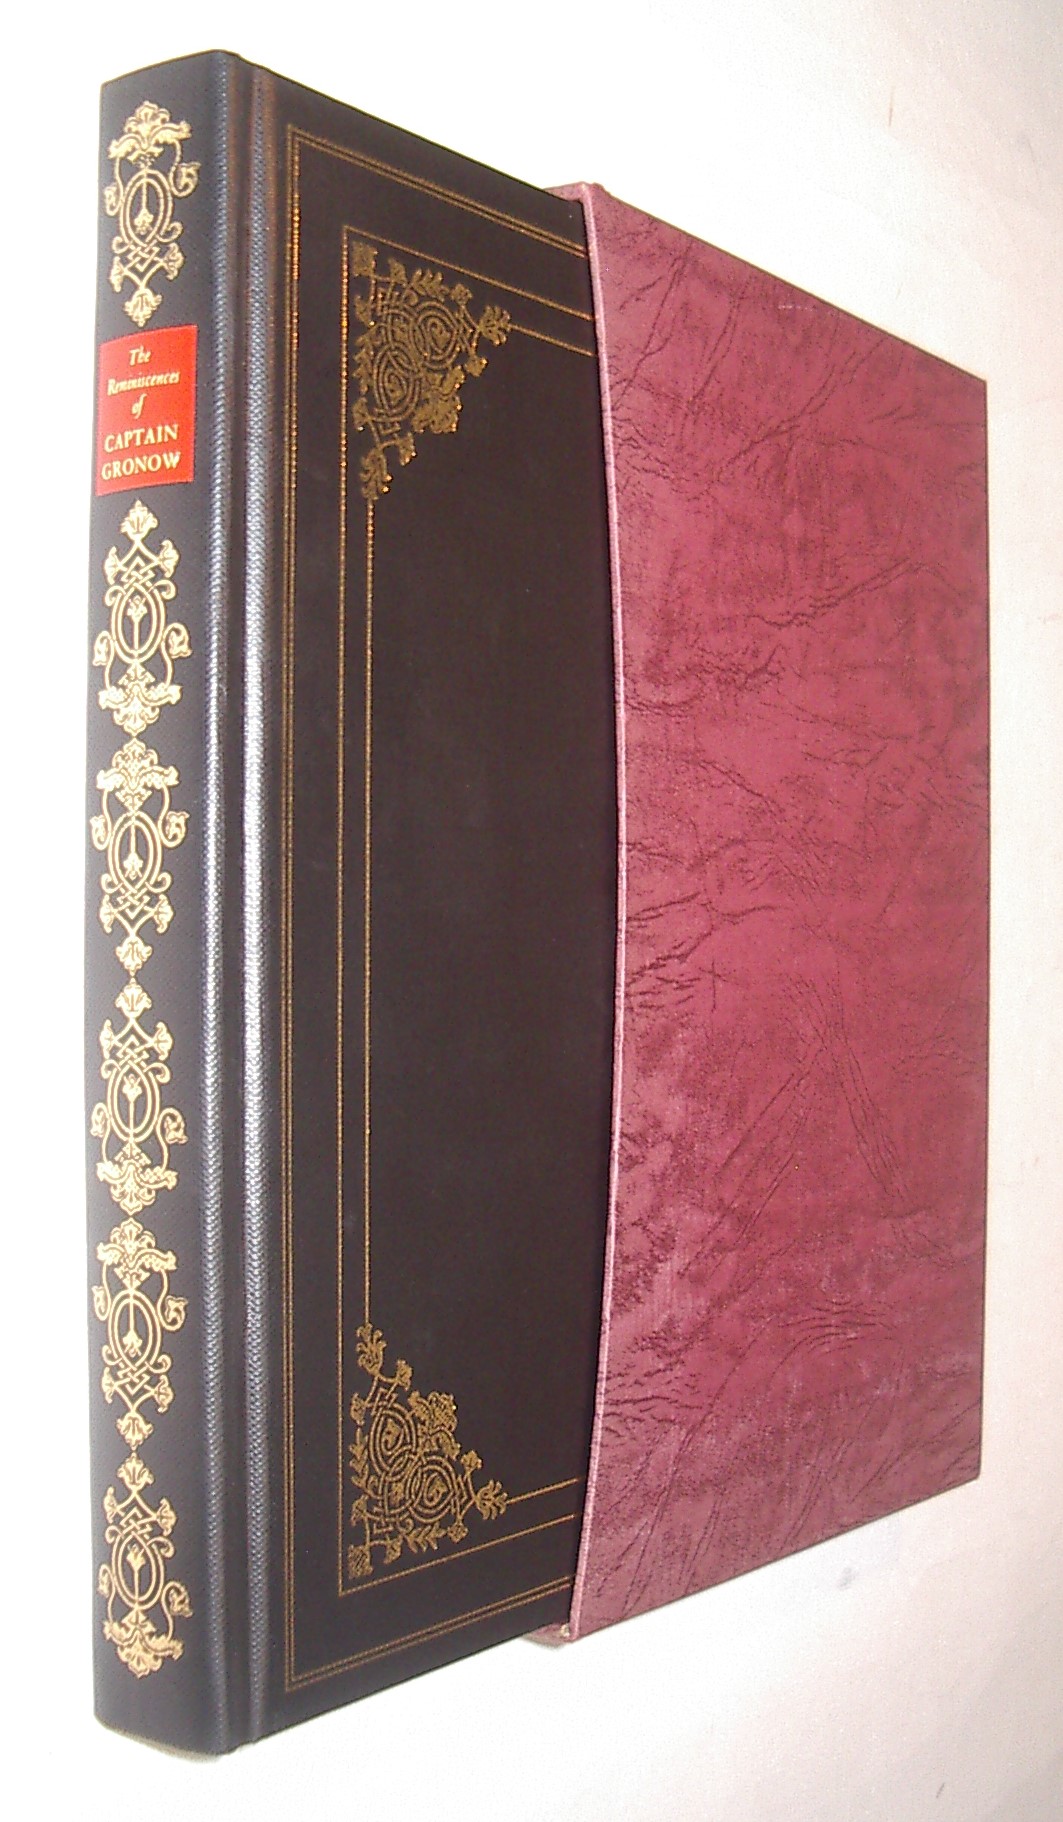 Gronow　of　Selections　The　Society　Reminiscences　from　Folio　Captain　1977